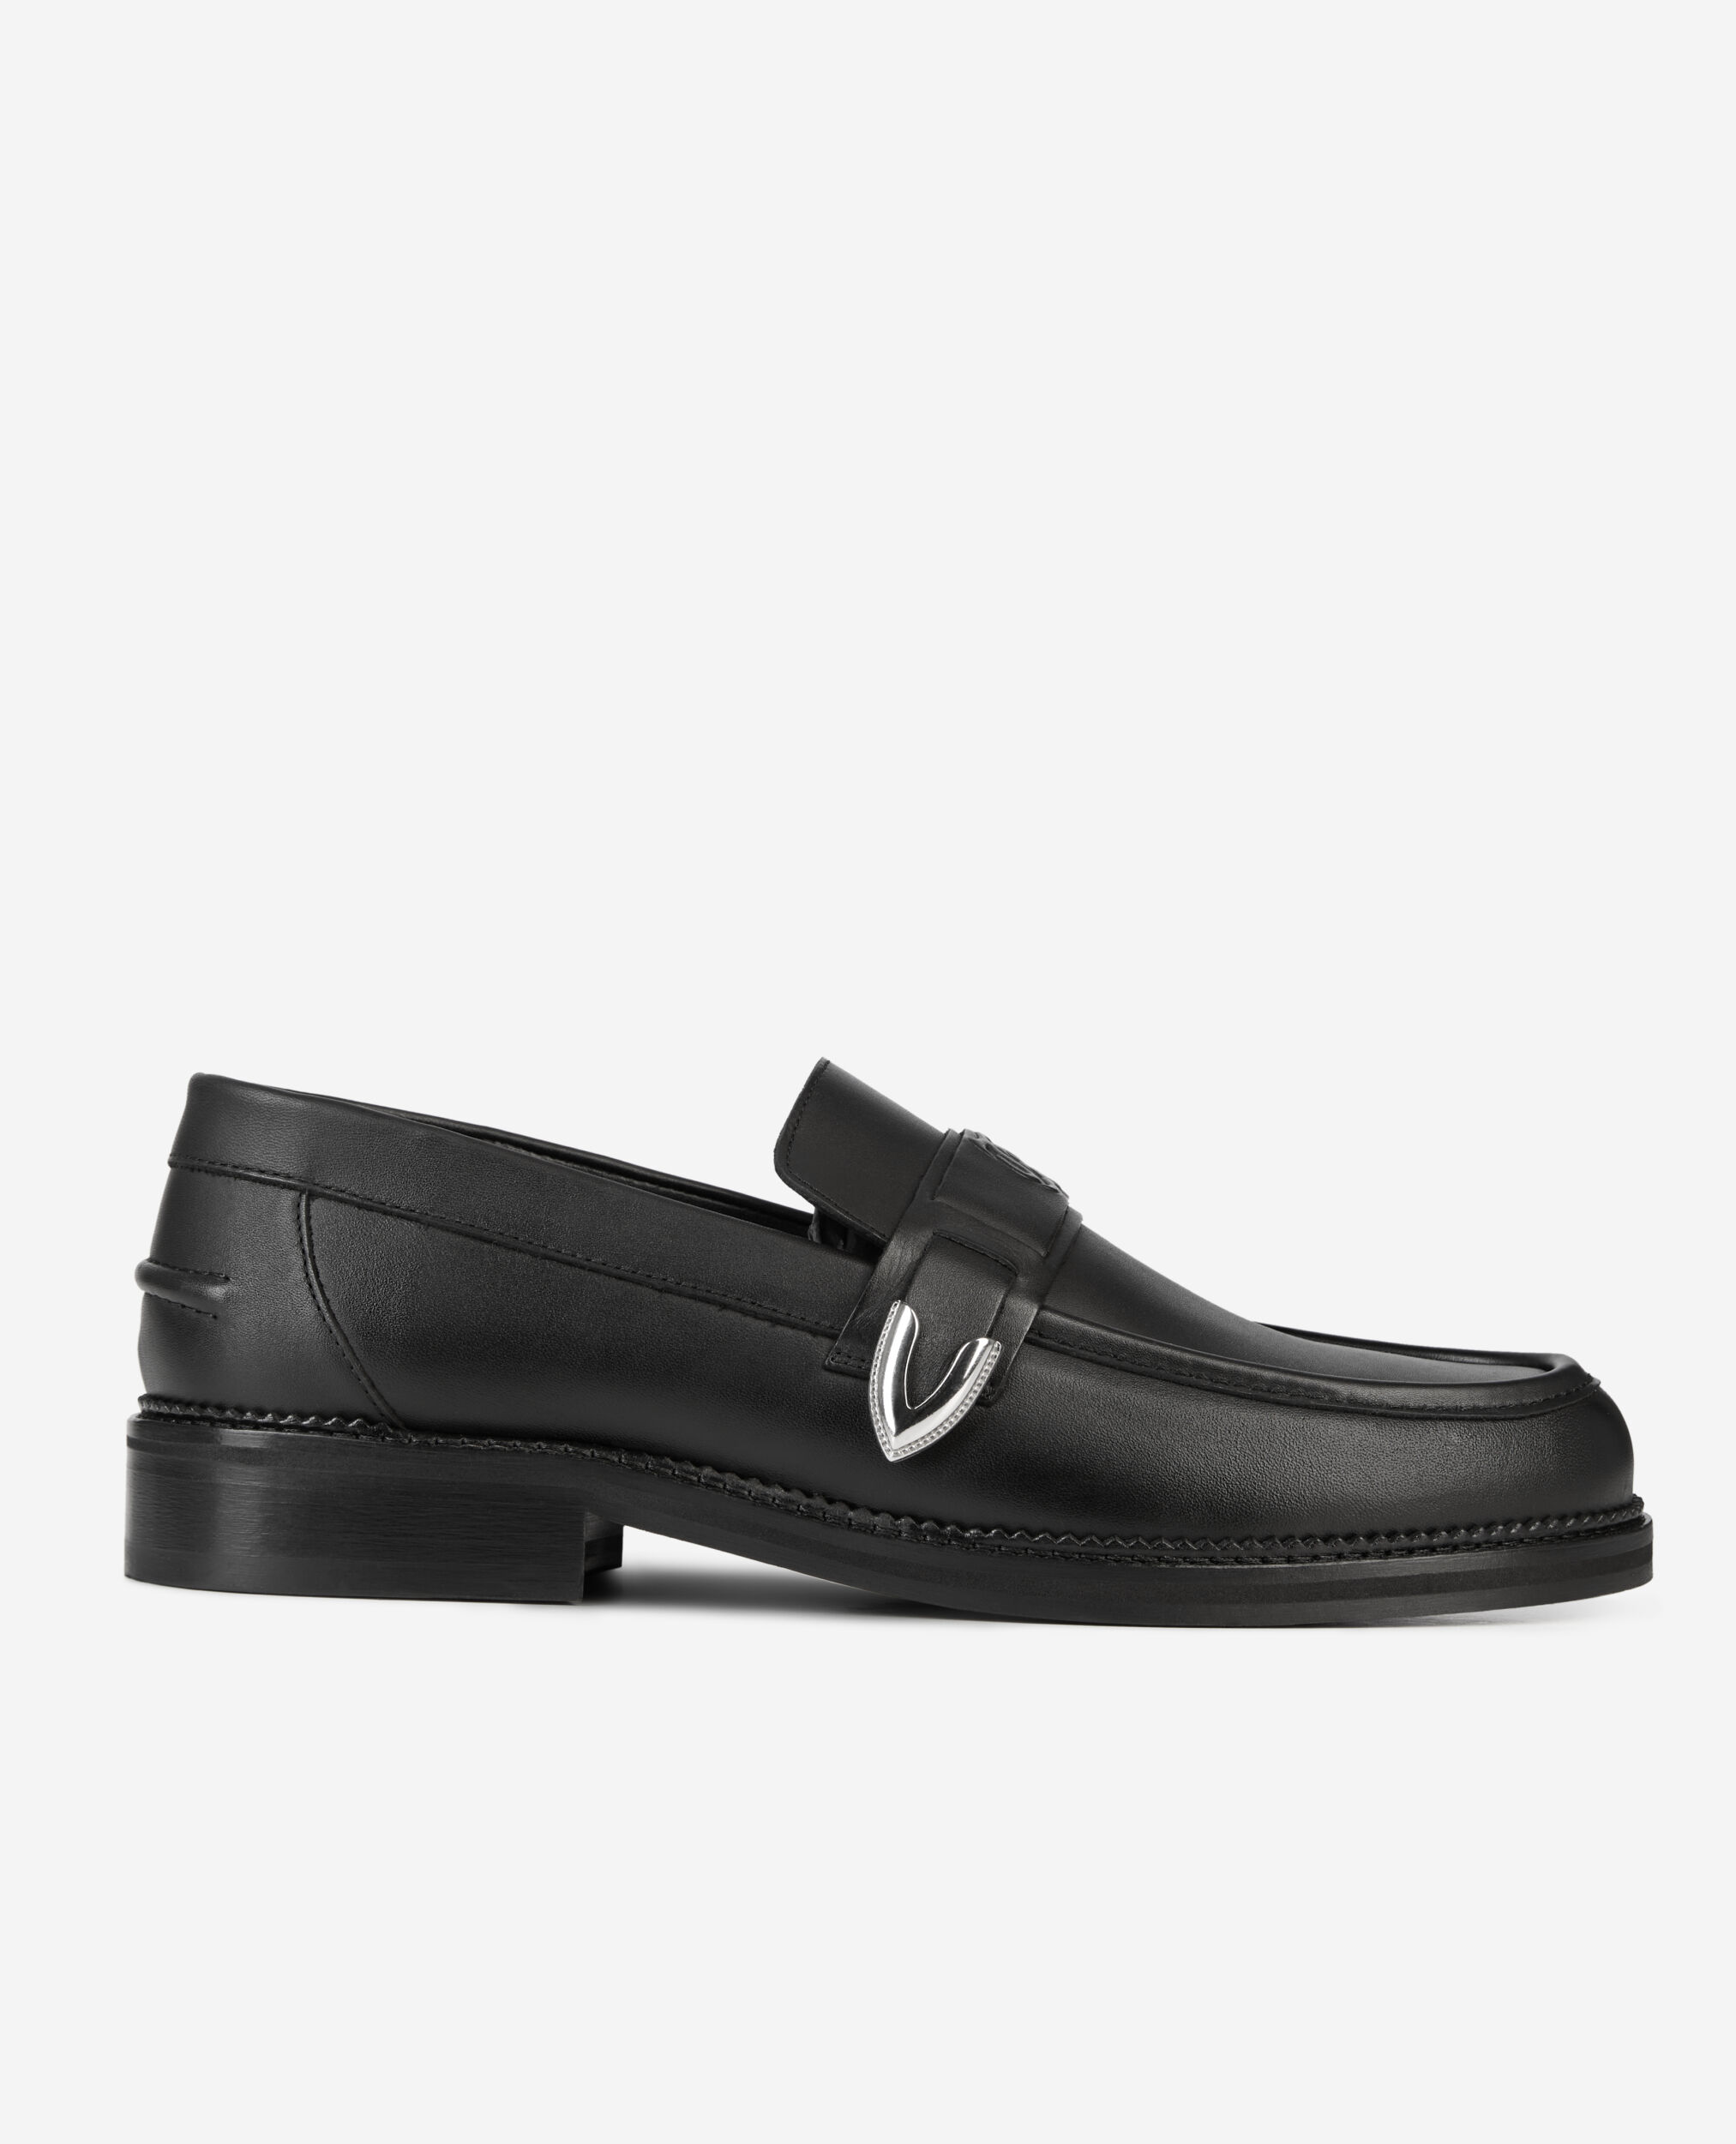 Black leather loafers with metallic inserts, BLACK, hi-res image number null